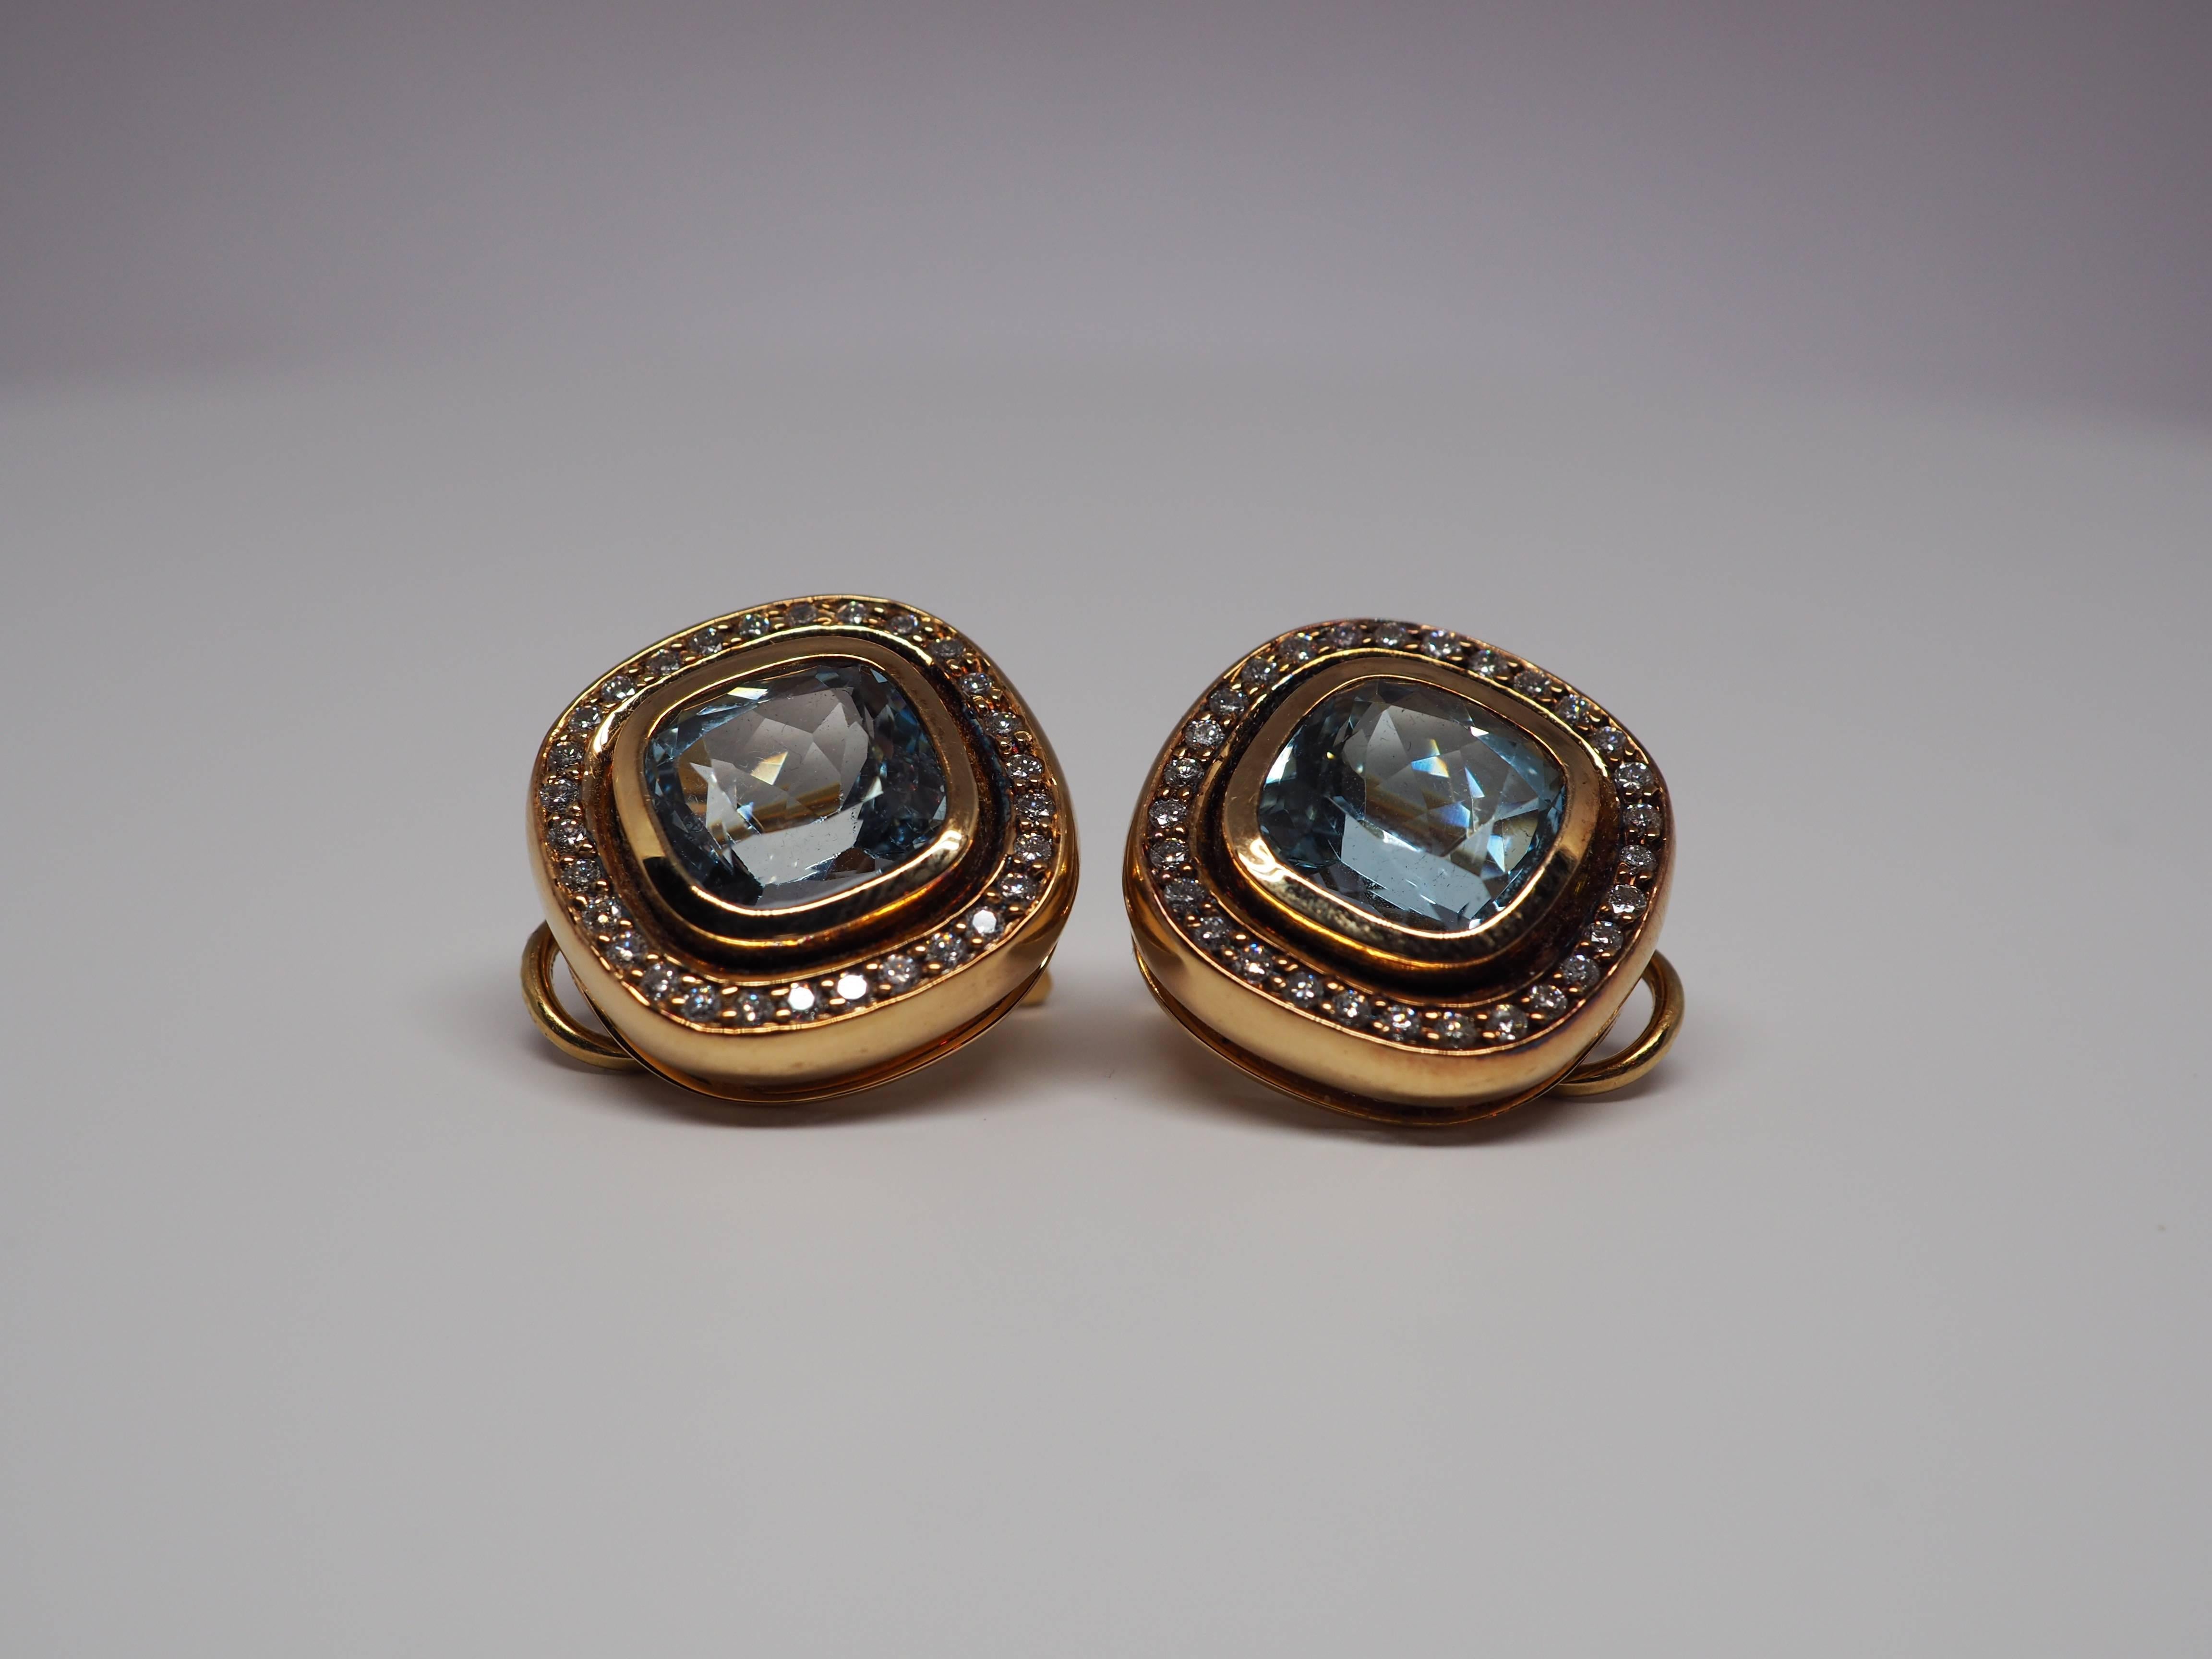 Thomas Leyser is renowned for his contemporary jewellery designs utilizing fine gemstones.

This 18k rose gold (27.06g) pair of earrings has 2 top quality Aquamarines, facetted in cushion shape (10x10mm, 8.50ct) + 60 diamonds G/VS round (1.4mm,